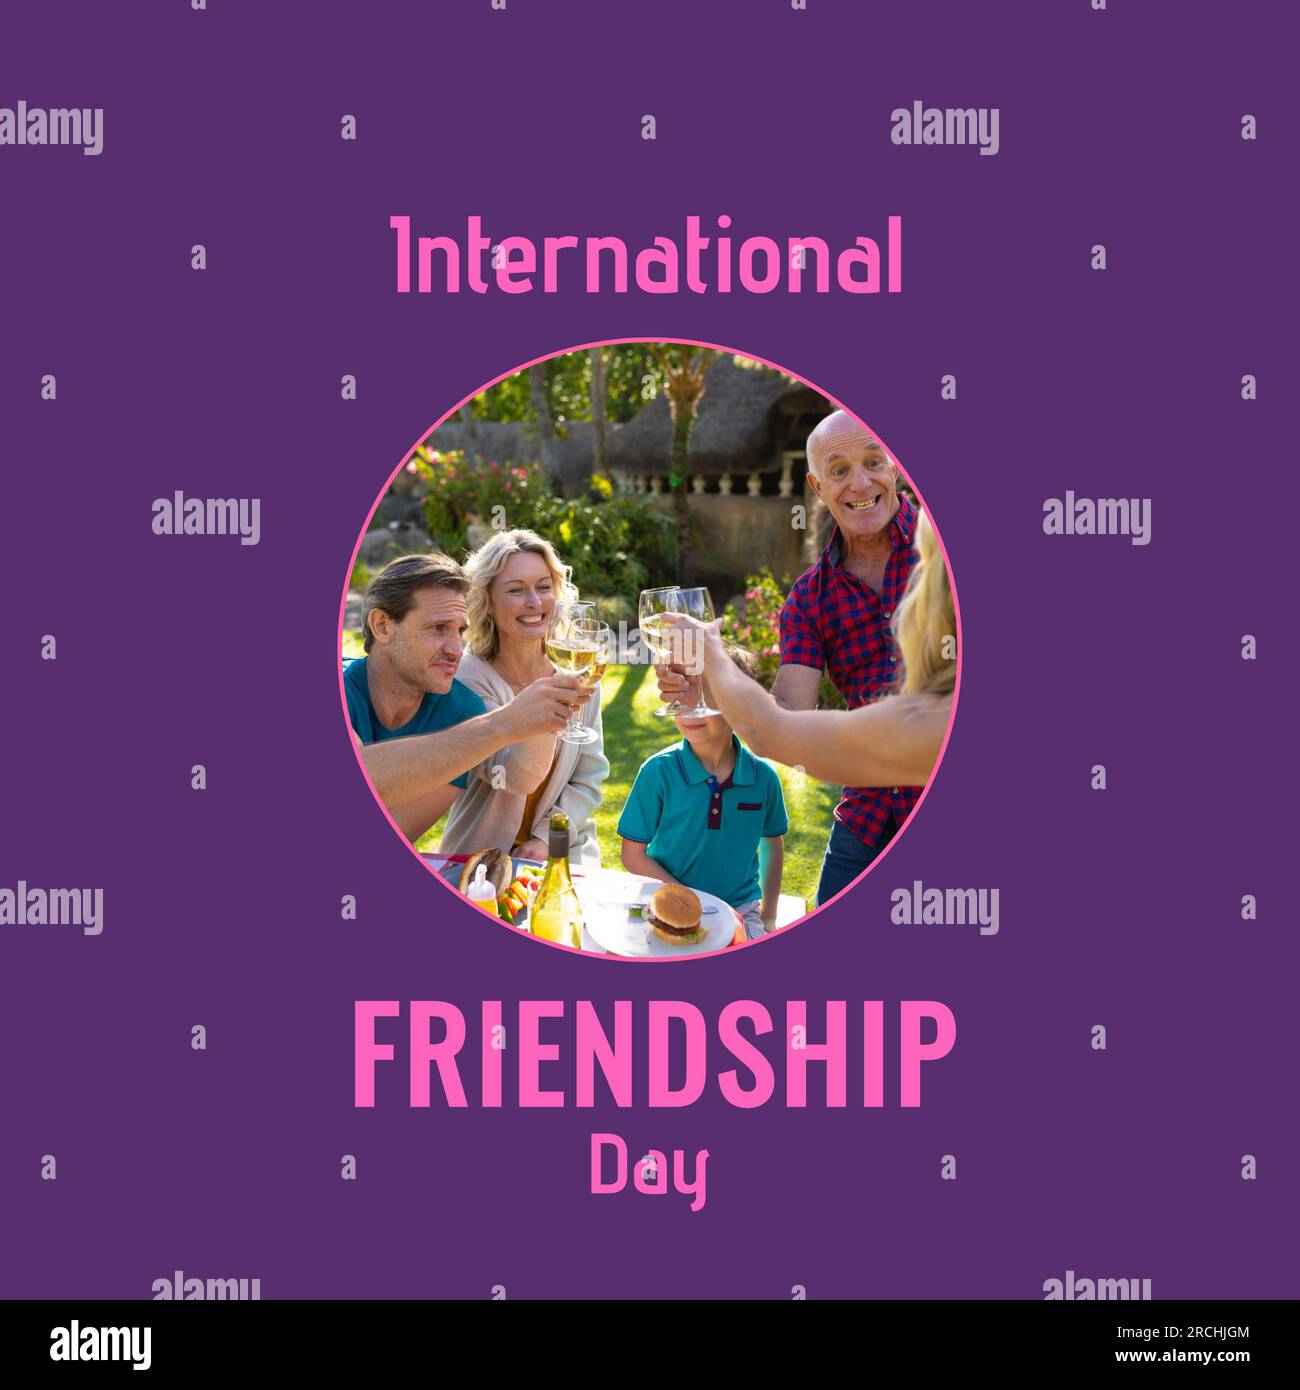 International friendship day text on purple with caucasian three generation family making a toast Stock Photo